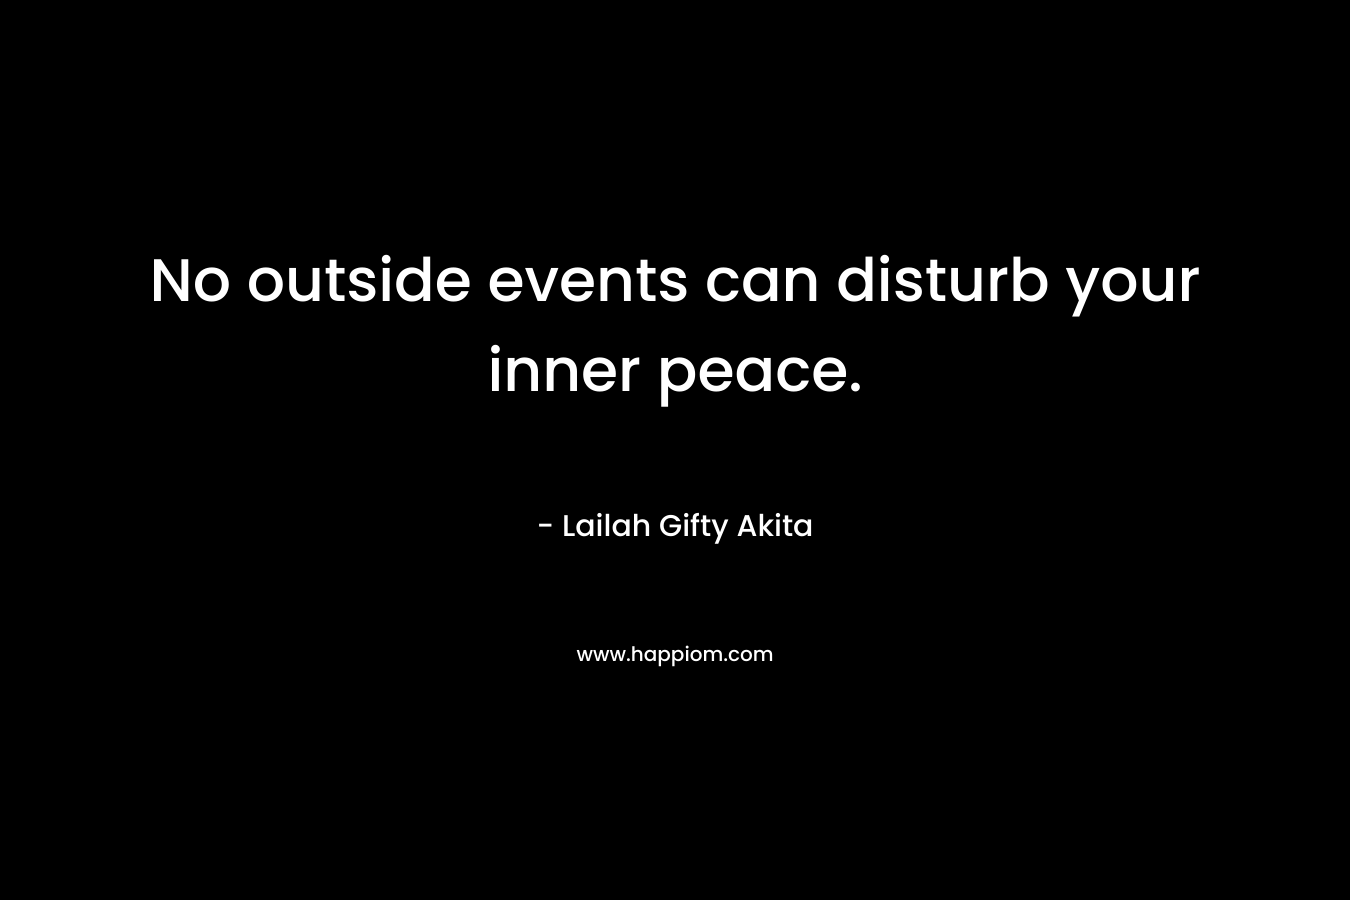 No outside events can disturb your inner peace.